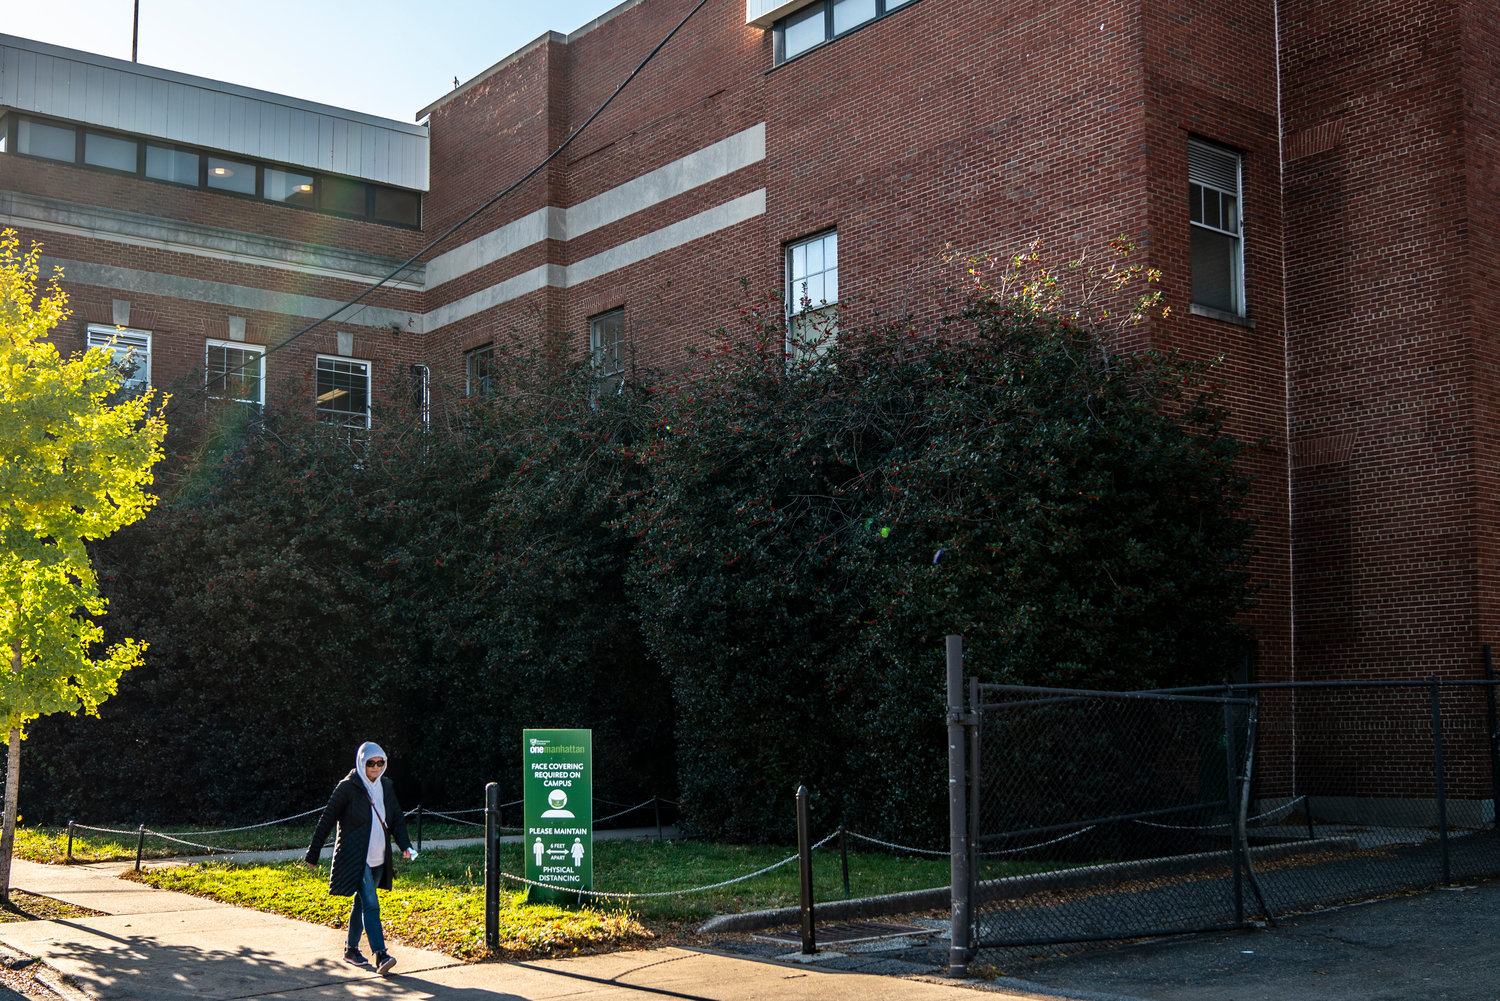 Manhattan College is currently $10 million short of meeting its fiscal budget this year. As a result, more than two-dozen employees were furloughed by the college, while those remaining accepted temporary pay cuts.